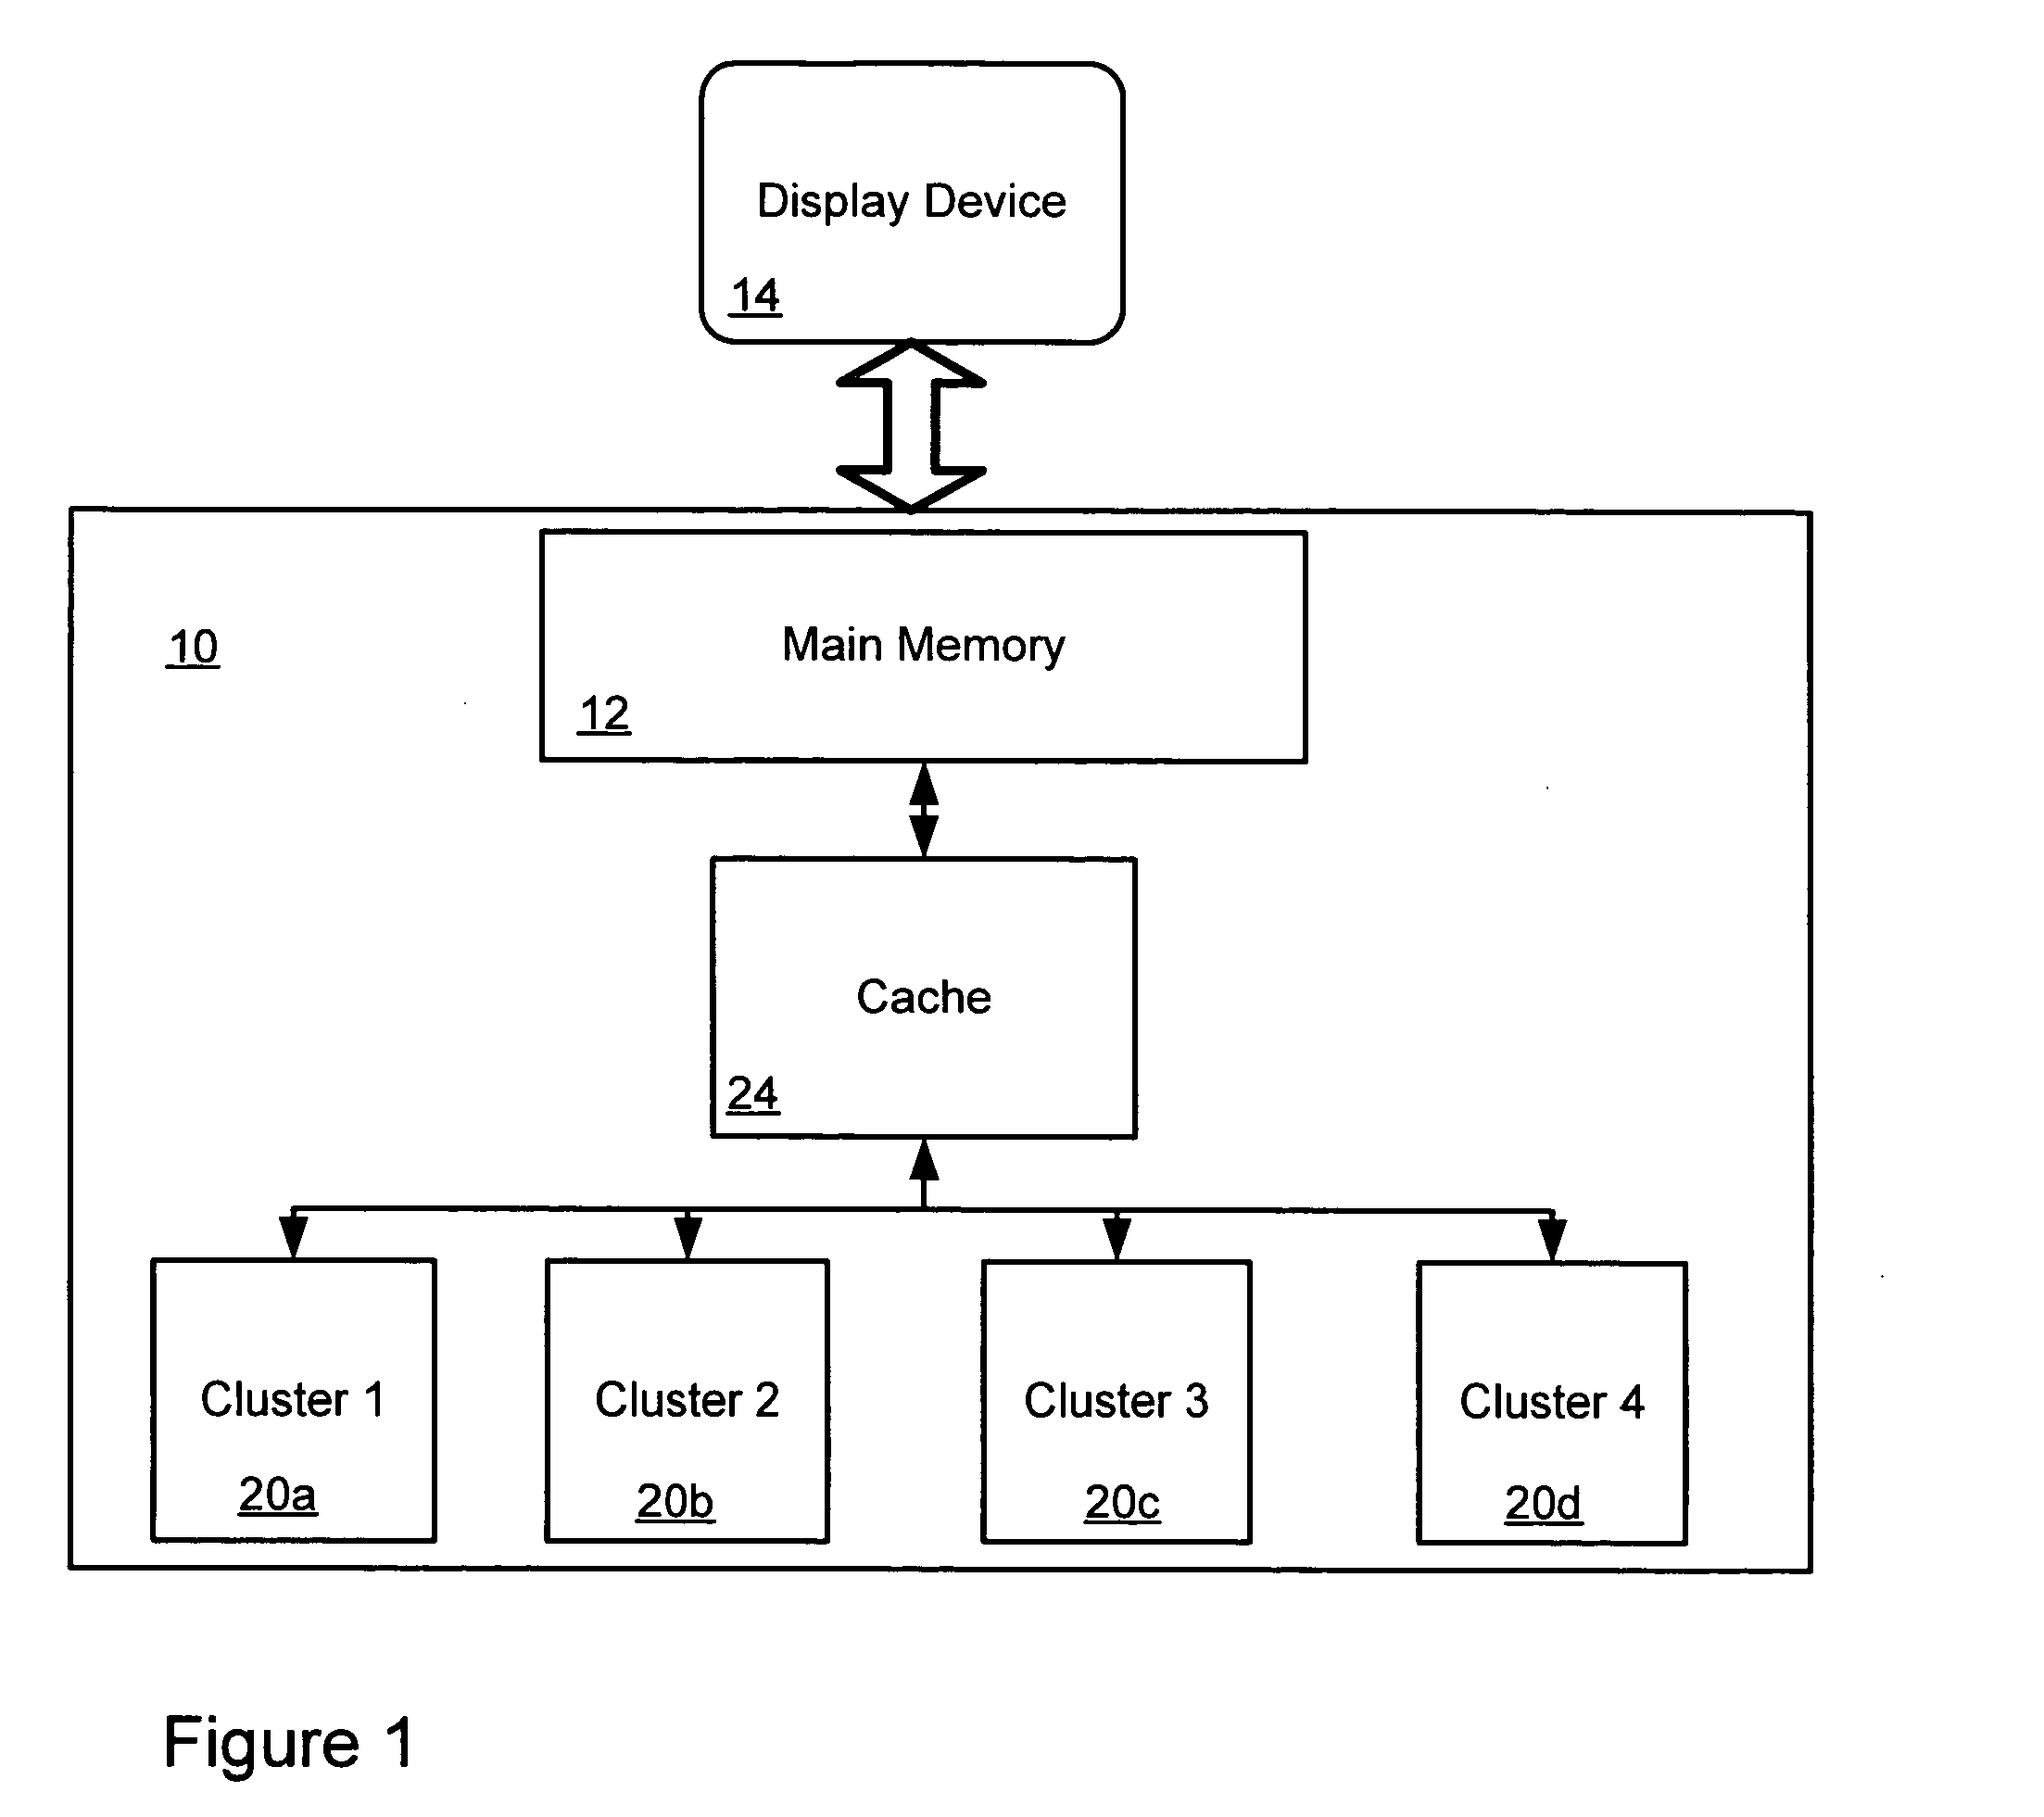 Affinity mask assignment system and method for multiprocessor systems